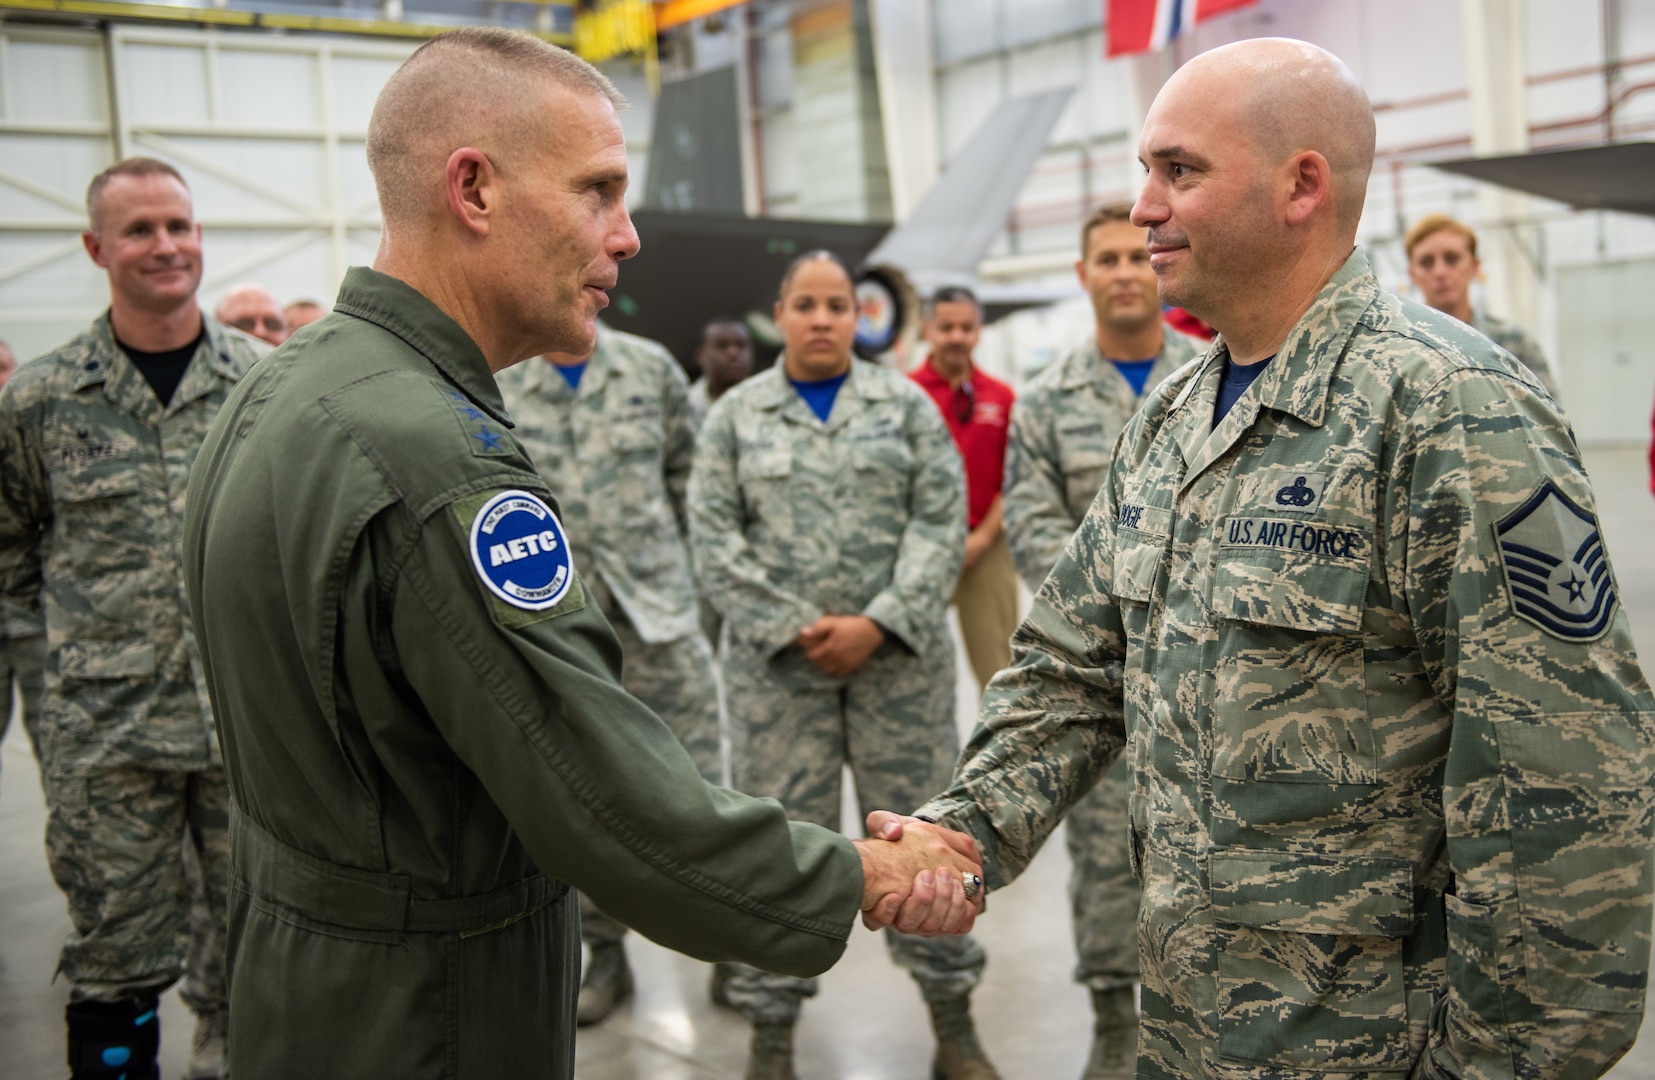 U.S. Air Force Lt. Gen. Steven Kwast, commander of Air Education and Training Command, meets with an Airman assigned to the 56th Fighter Wing at Luke Air Force Base, Arizona, during a visit July 20, 2018. Kwast, a U.S. Air Force Academy graduate, will pass command of AETC to Lt. Gen. Brad Webb July 26, 2019.